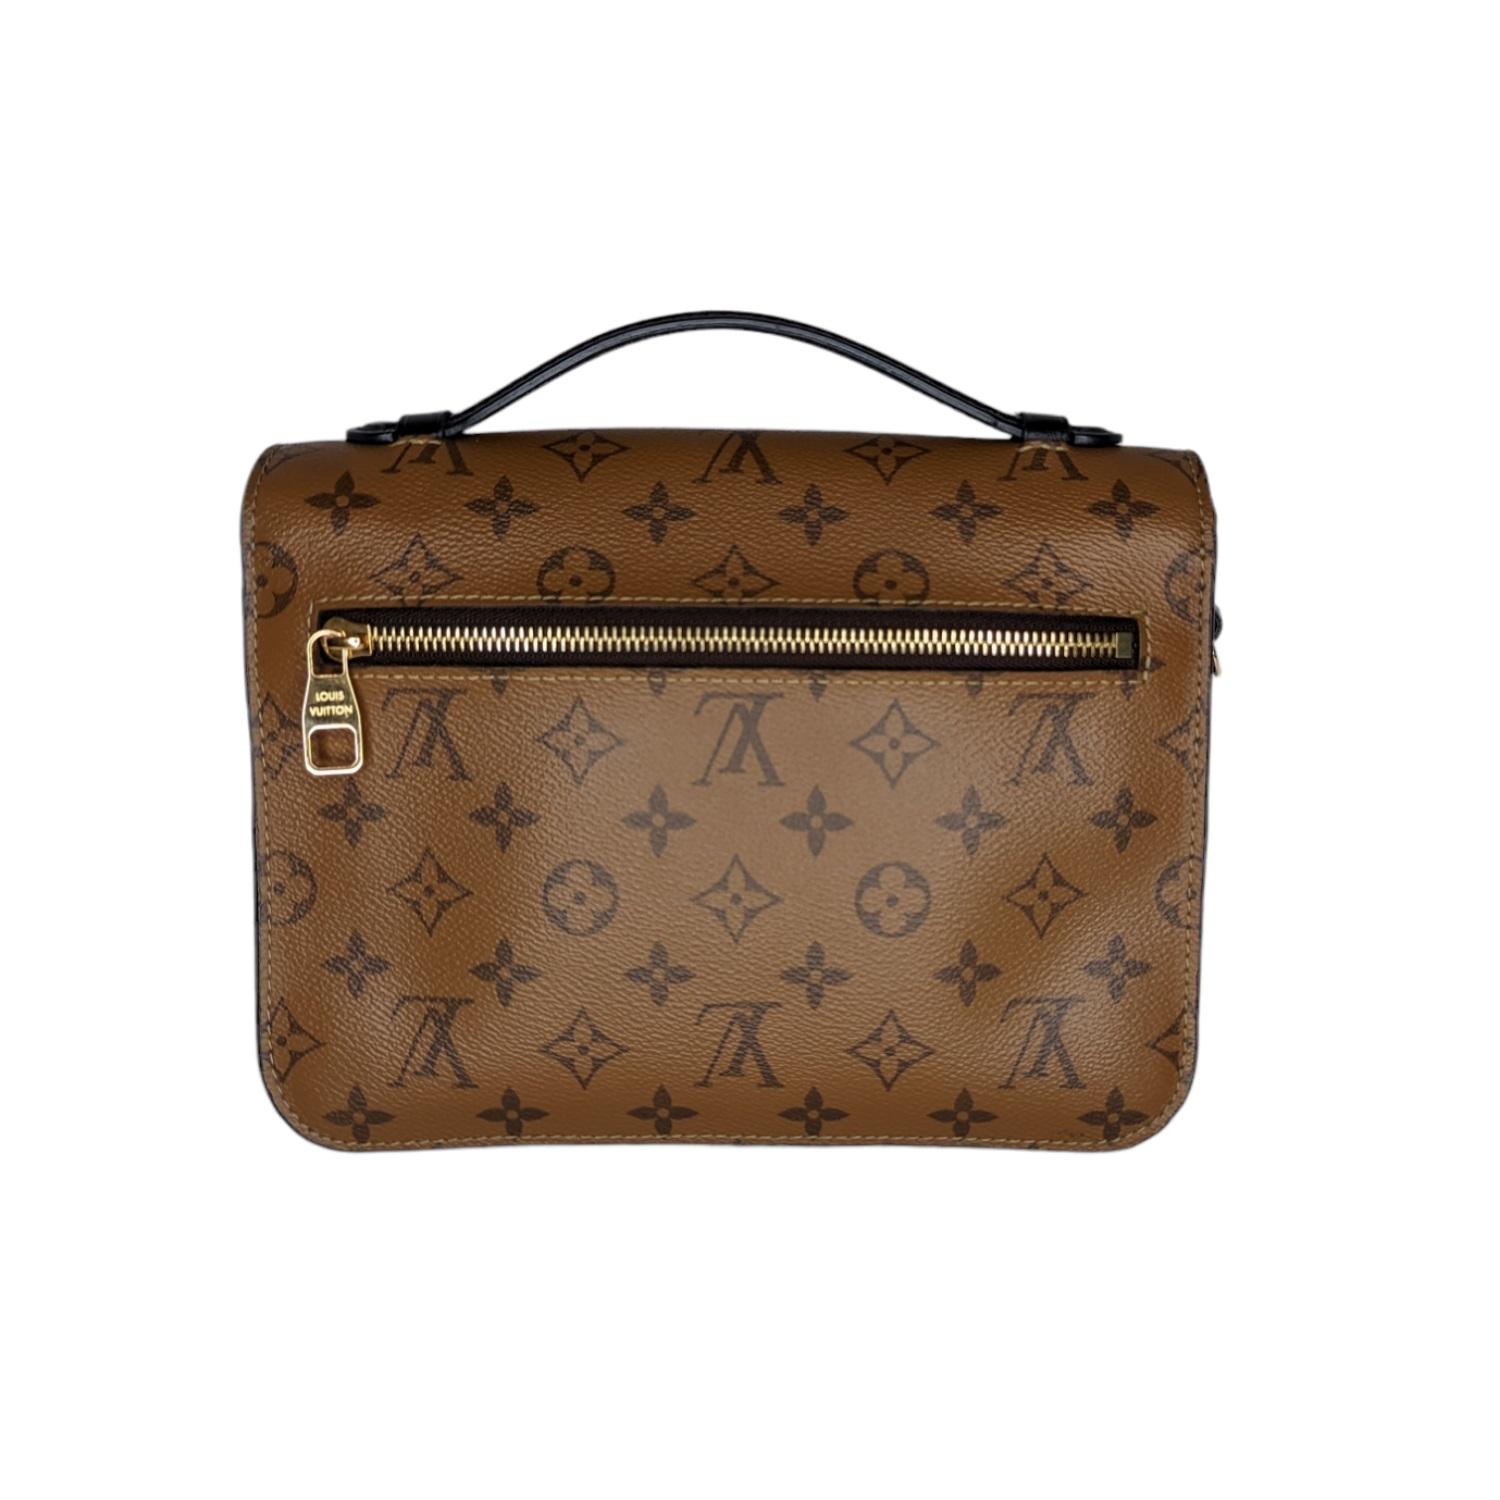 This handbag is crafted of Louis Vuitton monogram toile canvas in dark brown. The bag features a lighter brown canvas flap and back, a black leather strap handle, an optional adjustable light brown monogram canvas shoulder strap, a rear exterior